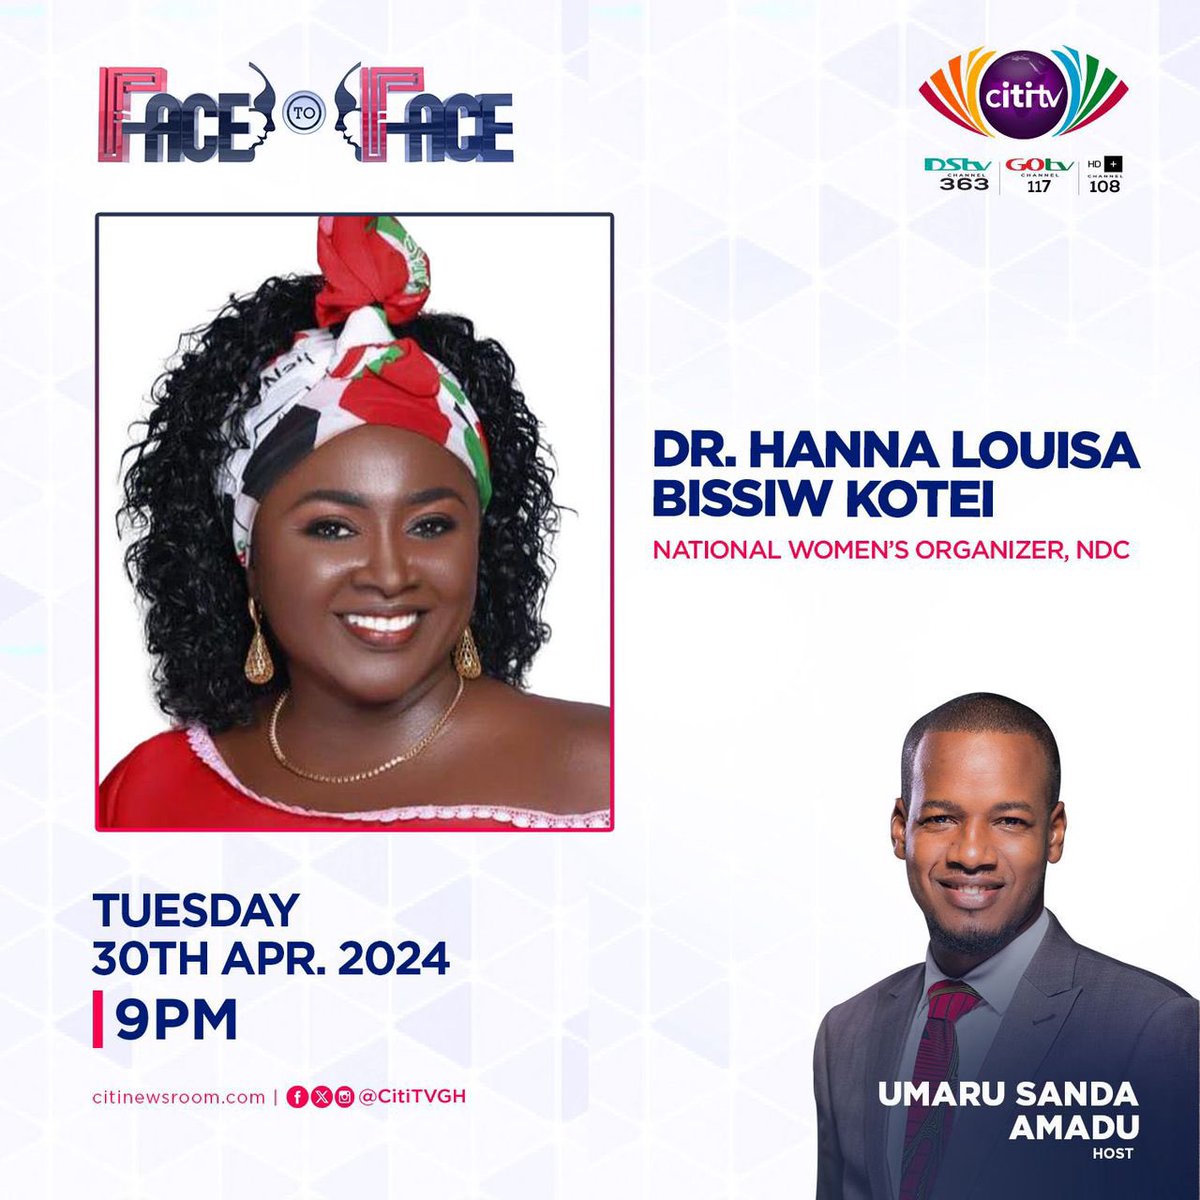 Tonight on #FacetoFace, @UmaruSanda speaks with his guest, Dr. Hanna Louisa Bissiw Kotei, the National Women’s Organizer for the National Democratic Congress. Tune in @9pm on Citi Tv